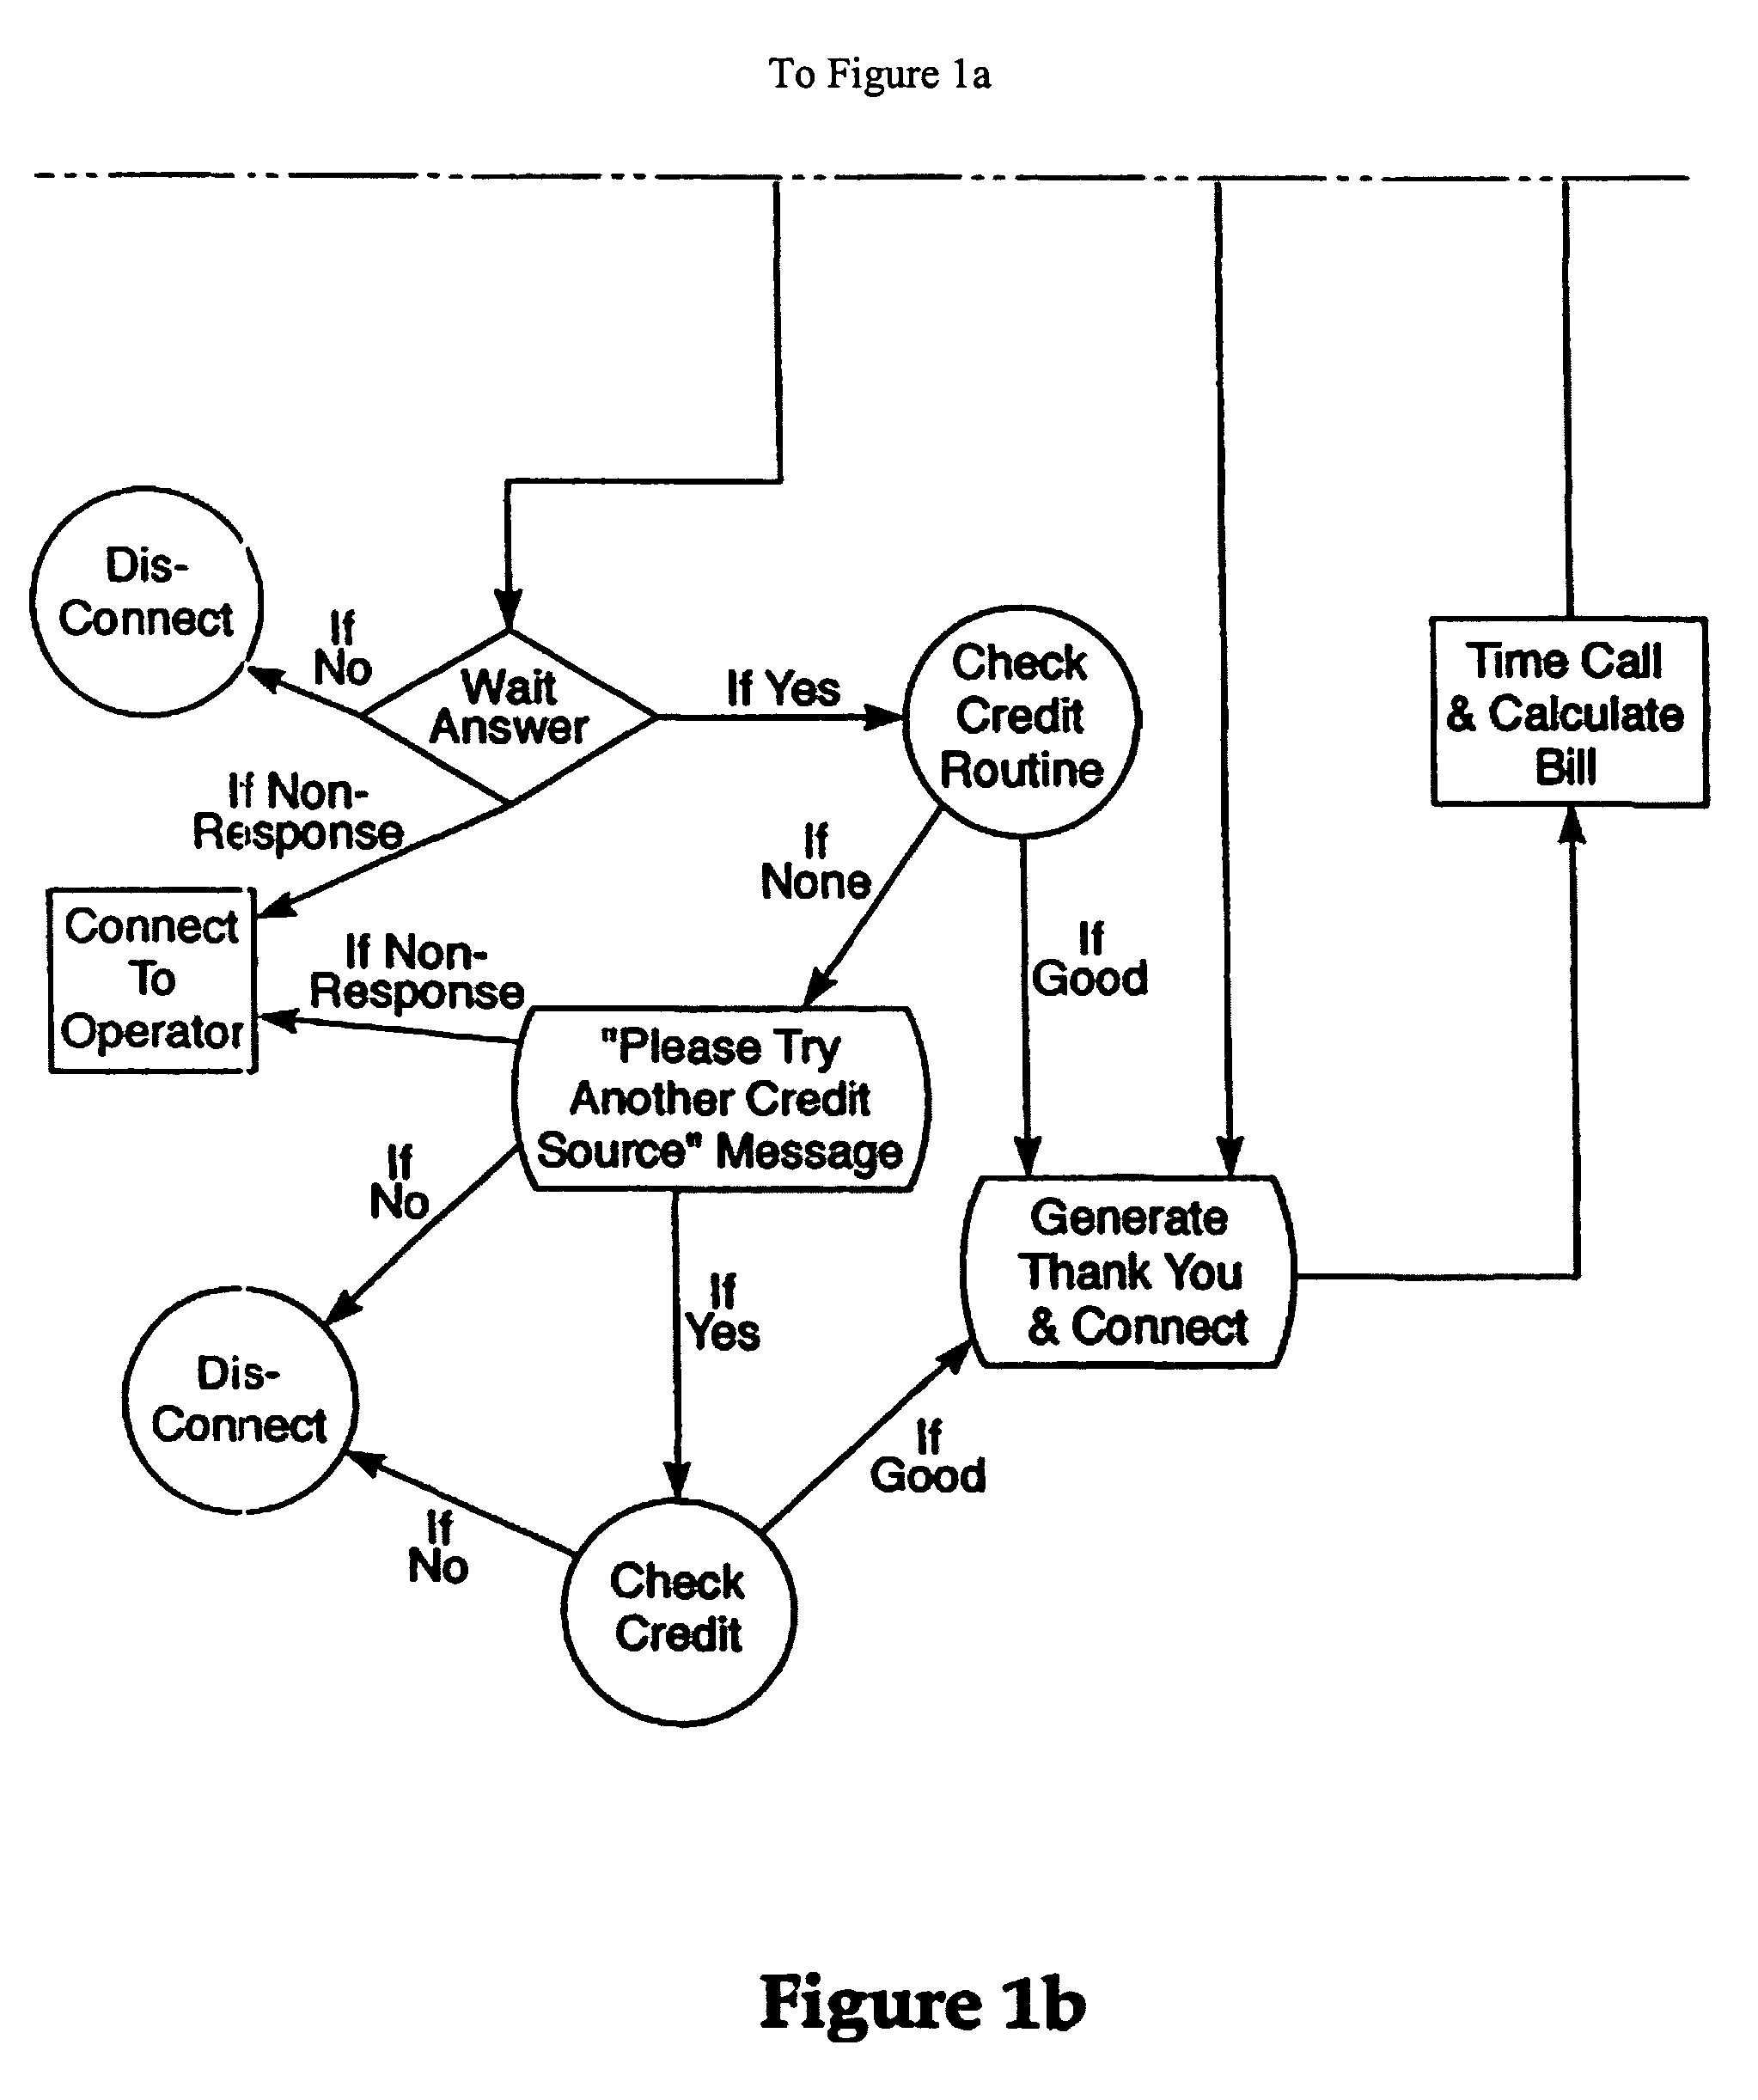 System and method for providing interoperable and on-demand telecommunications service